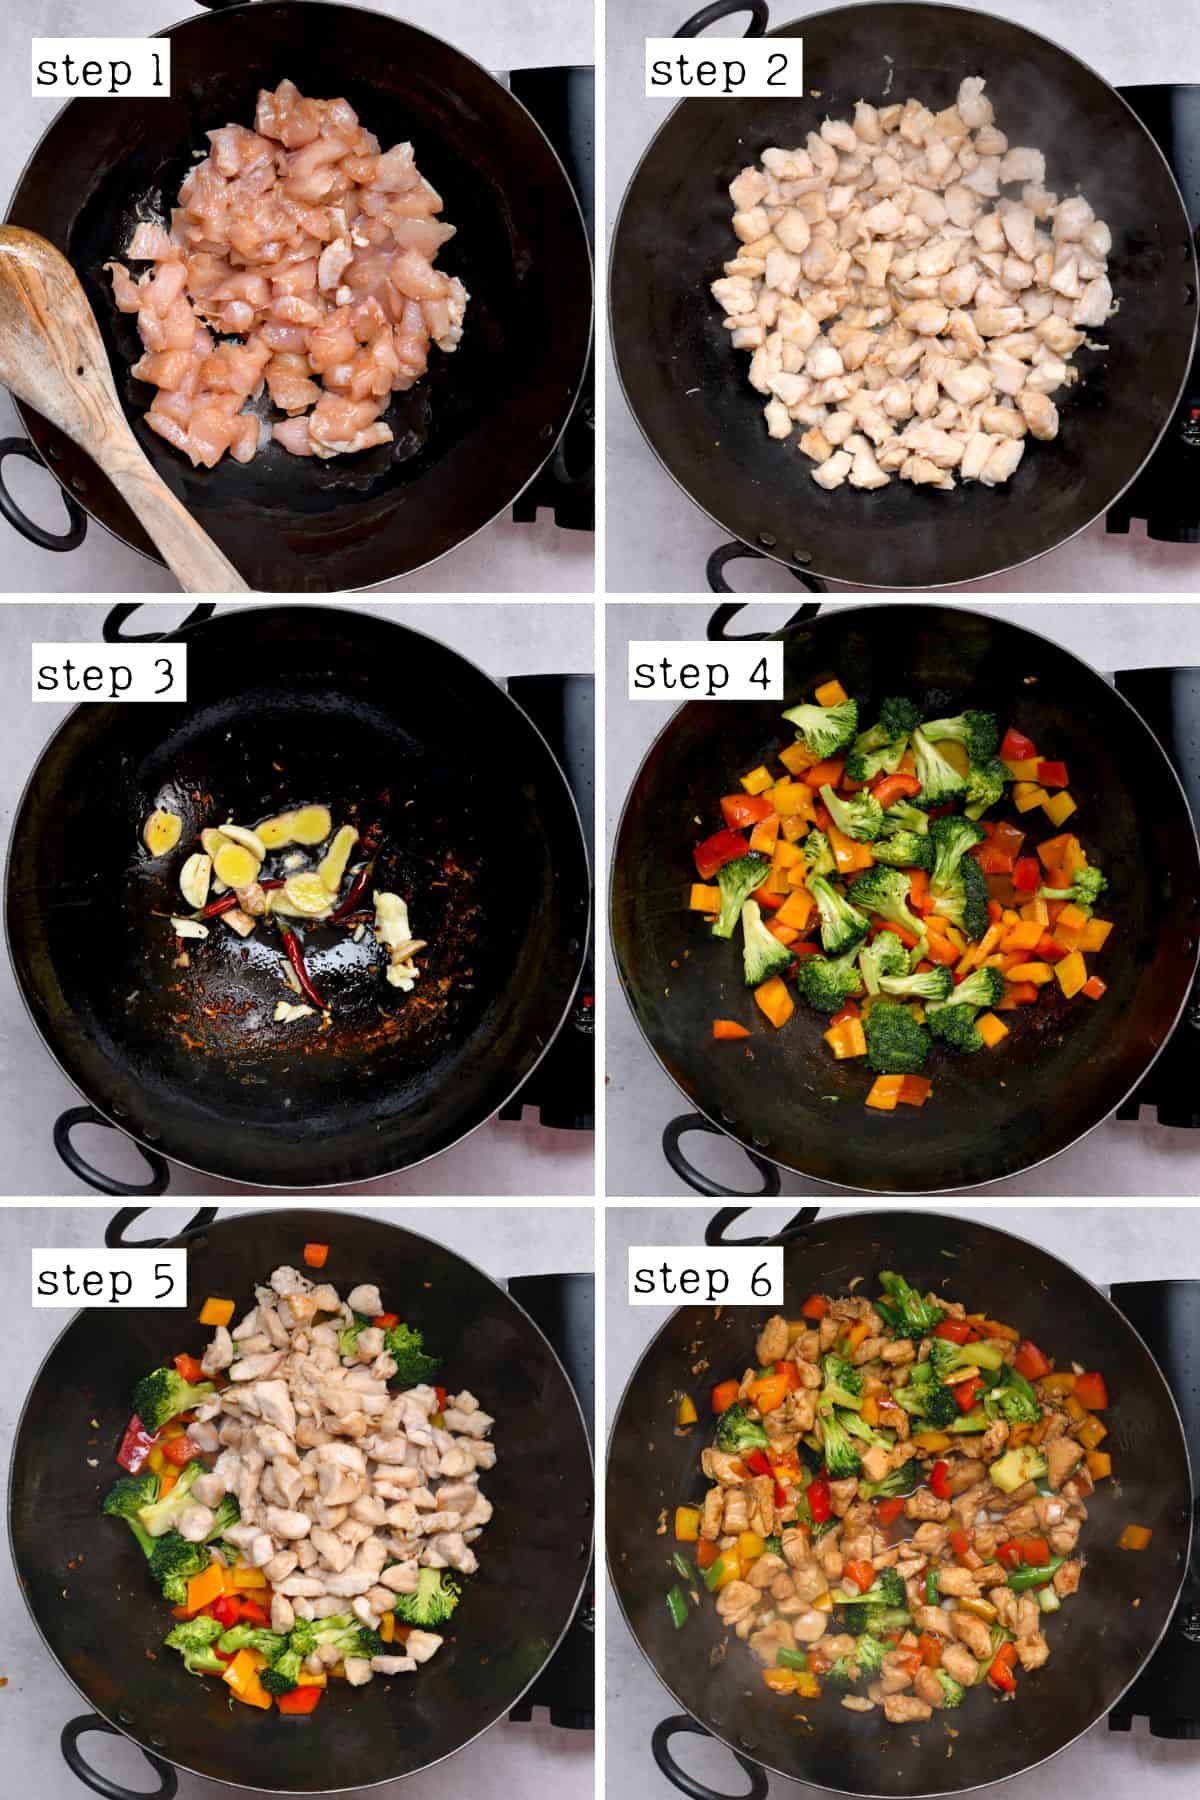 Steps for cooking stir fry chicken